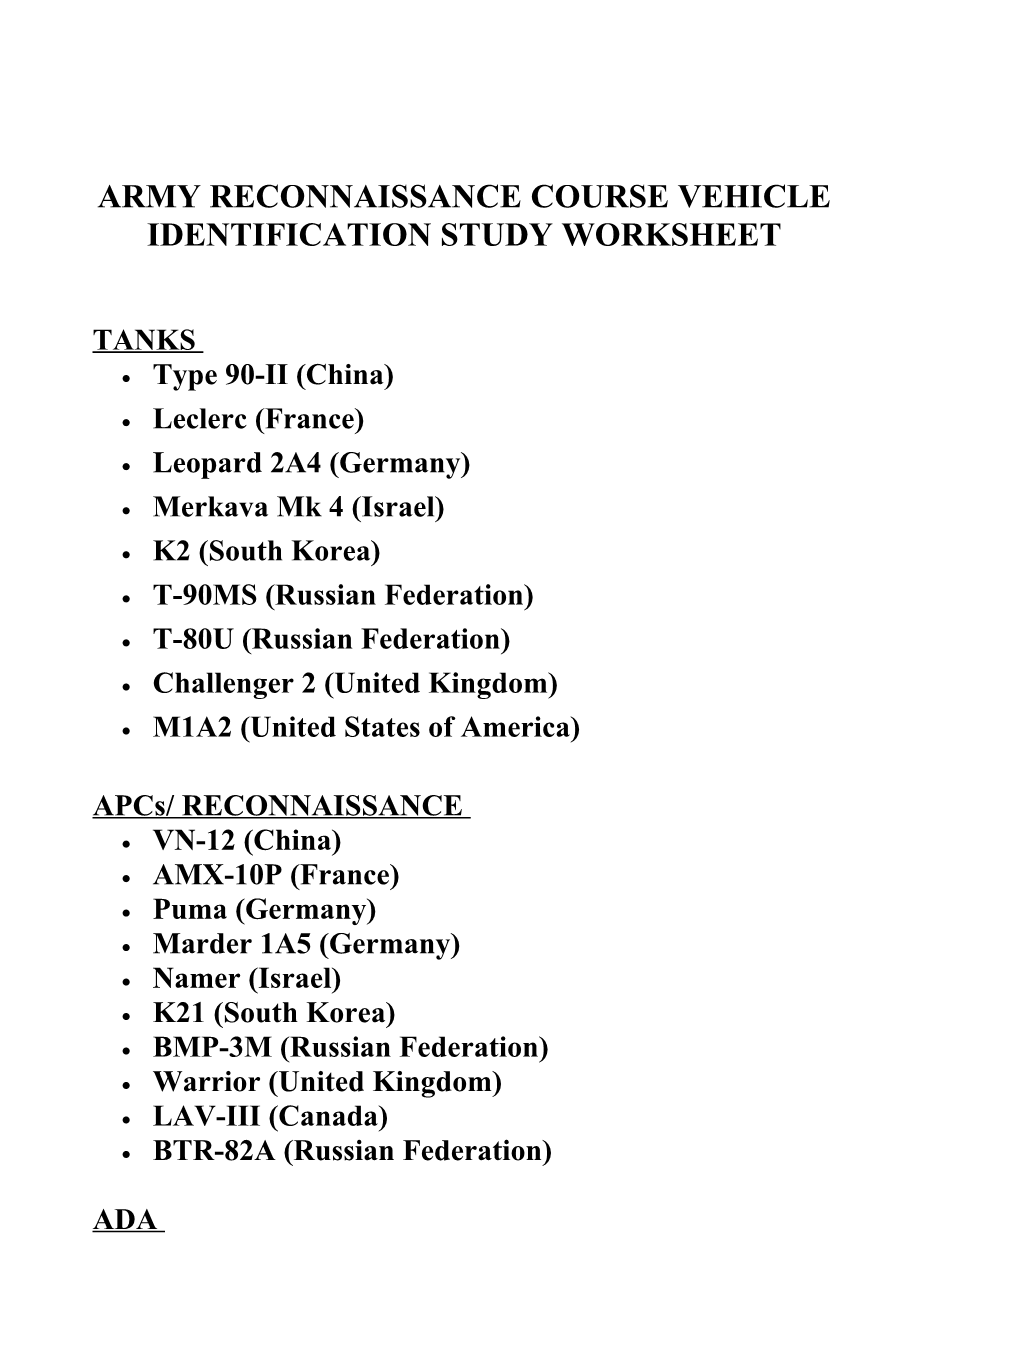 Army Reconnaissance Course Vehicle Identification Study Worksheet